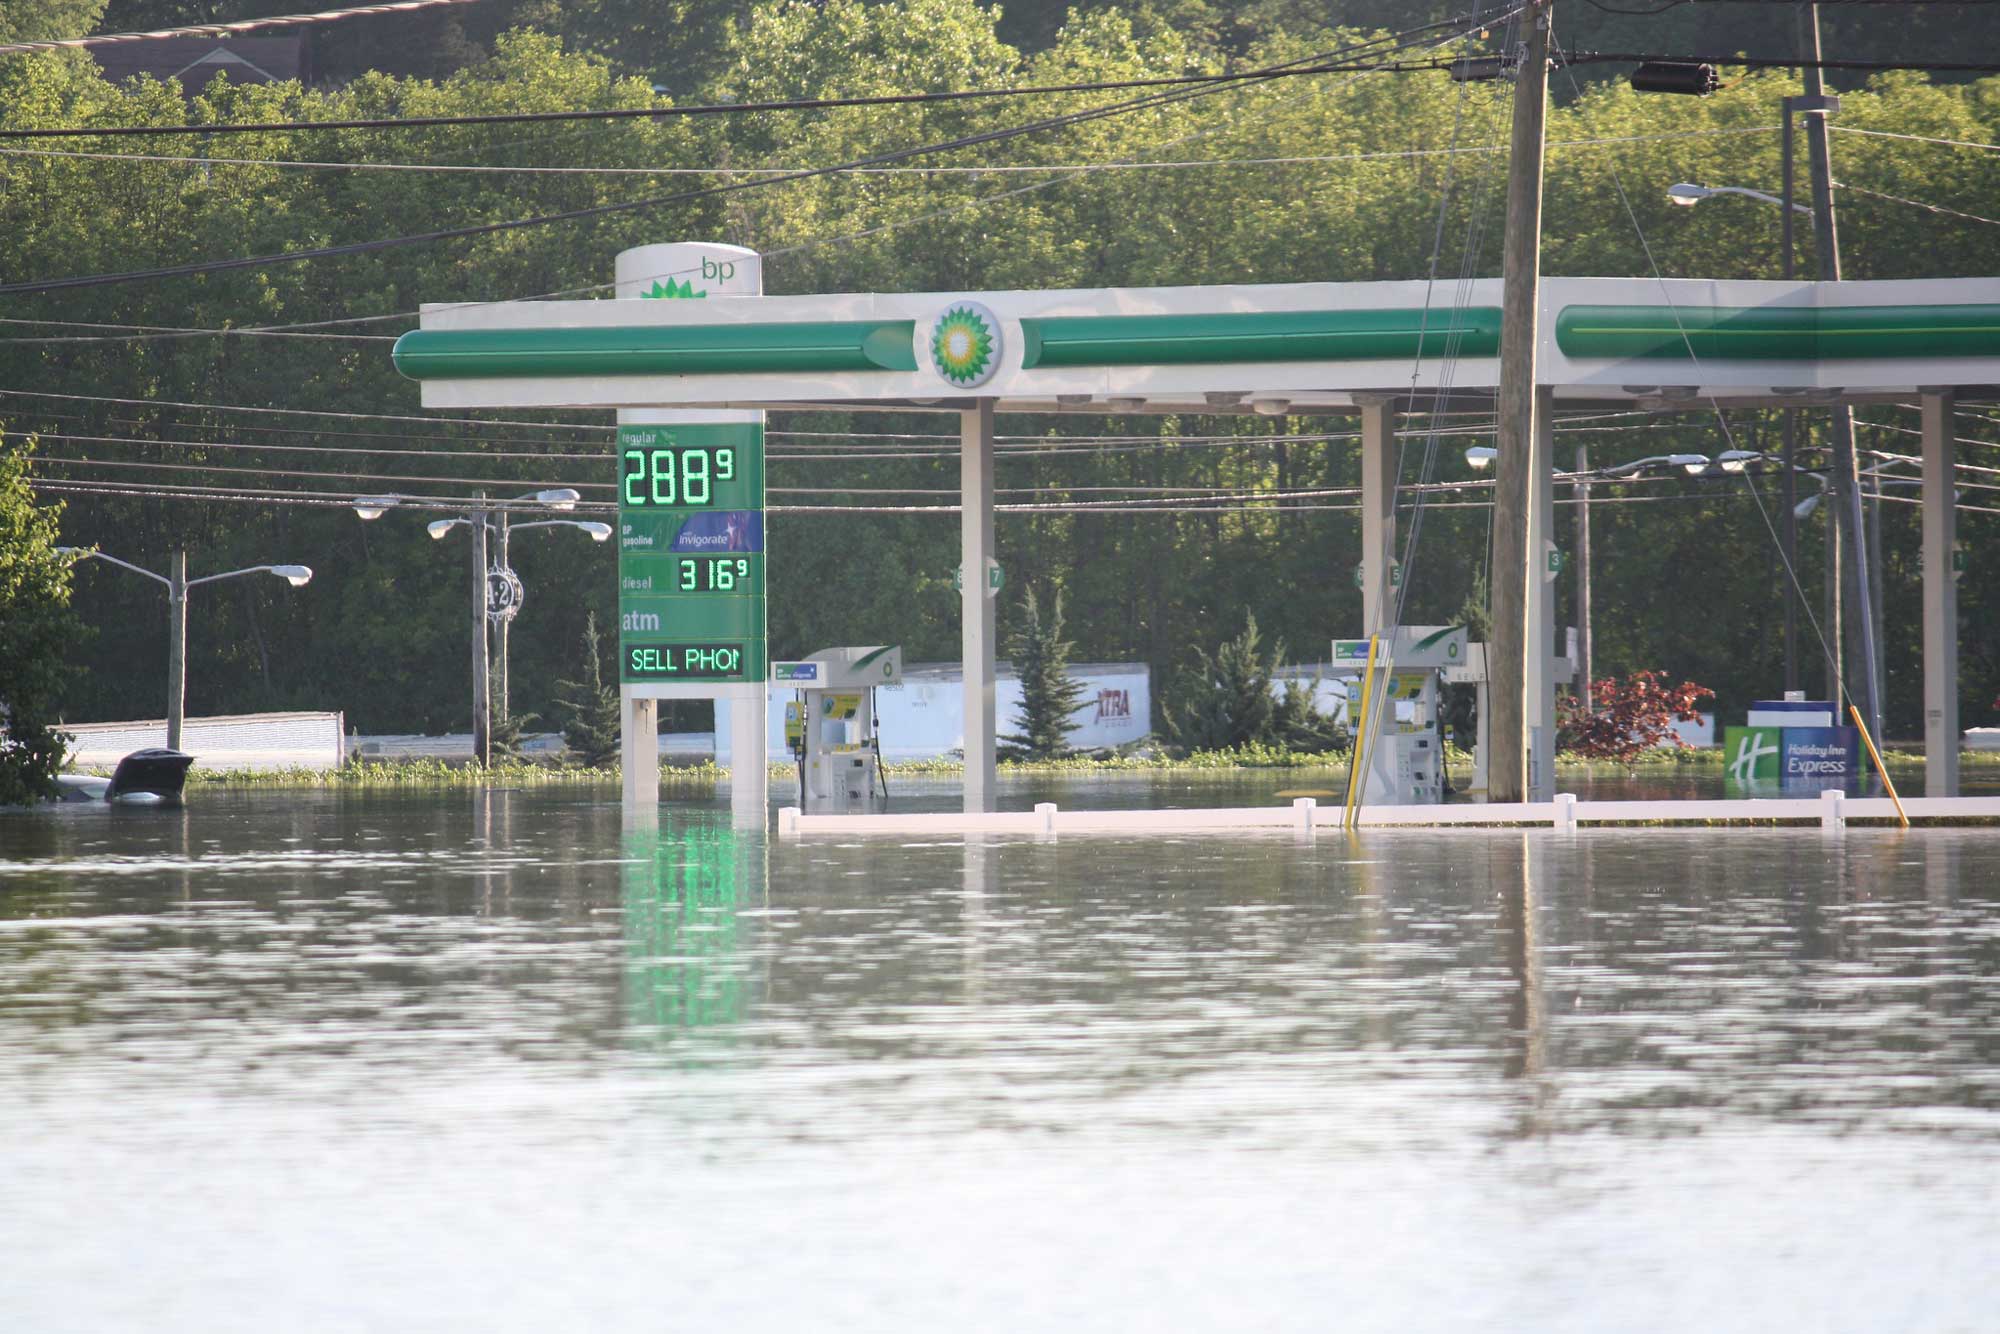 Photograph of a flooded gas station in 2010 in Nashville, Tennessee.